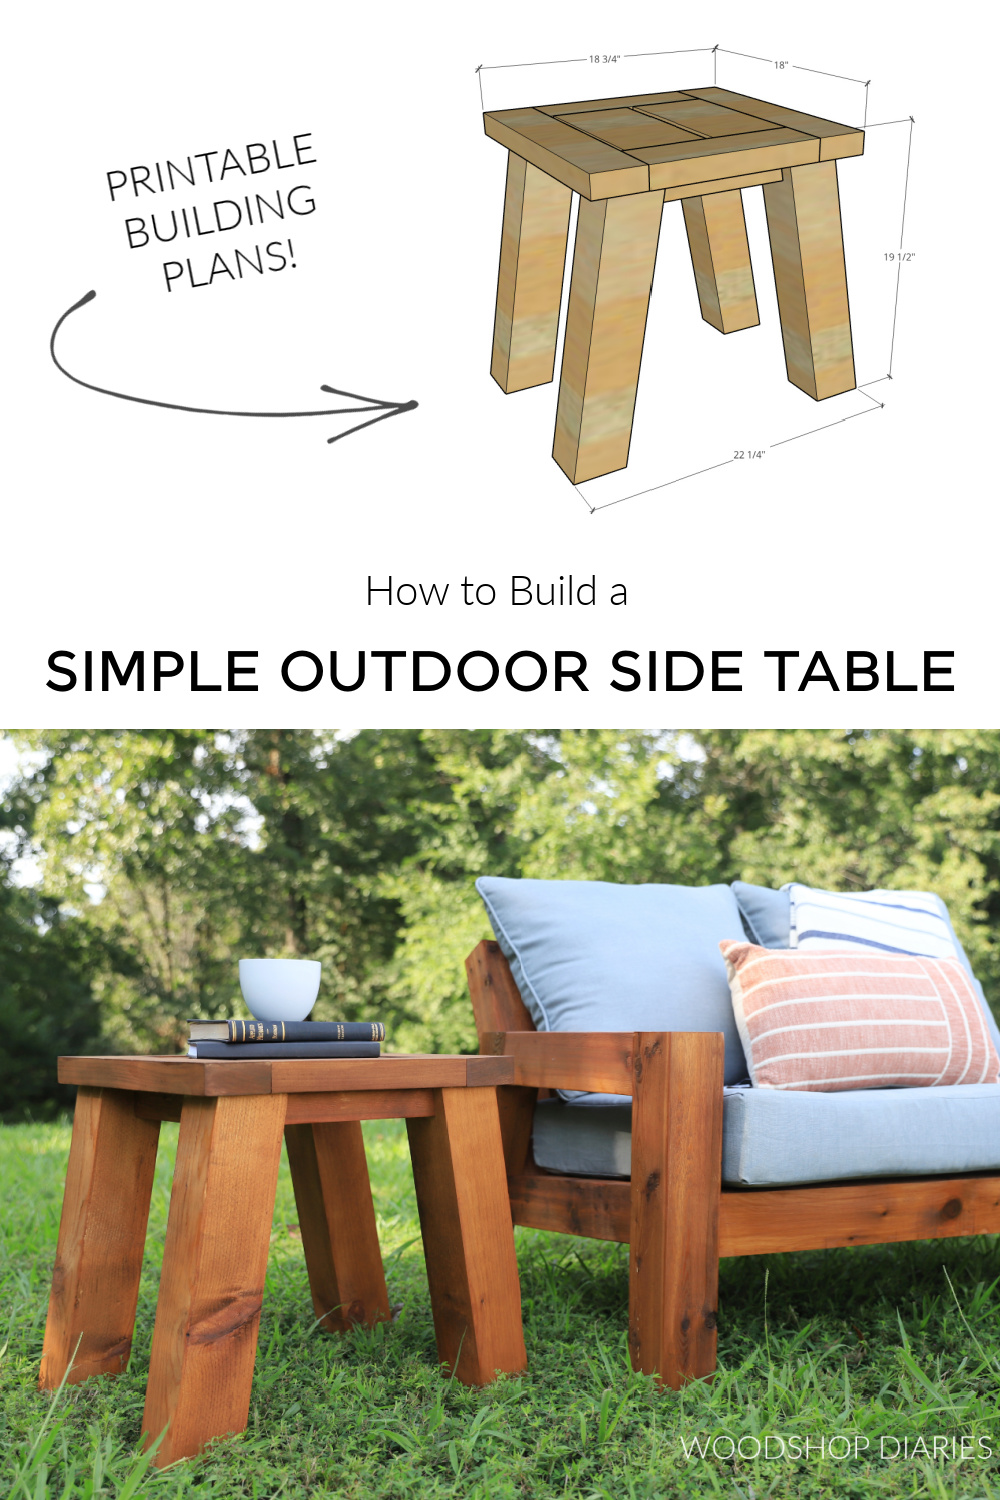 Pinterest collage image showing overall dimensional diagram at top and completed outdoor side table at bottom with text "how to build a simple outdoor side table"